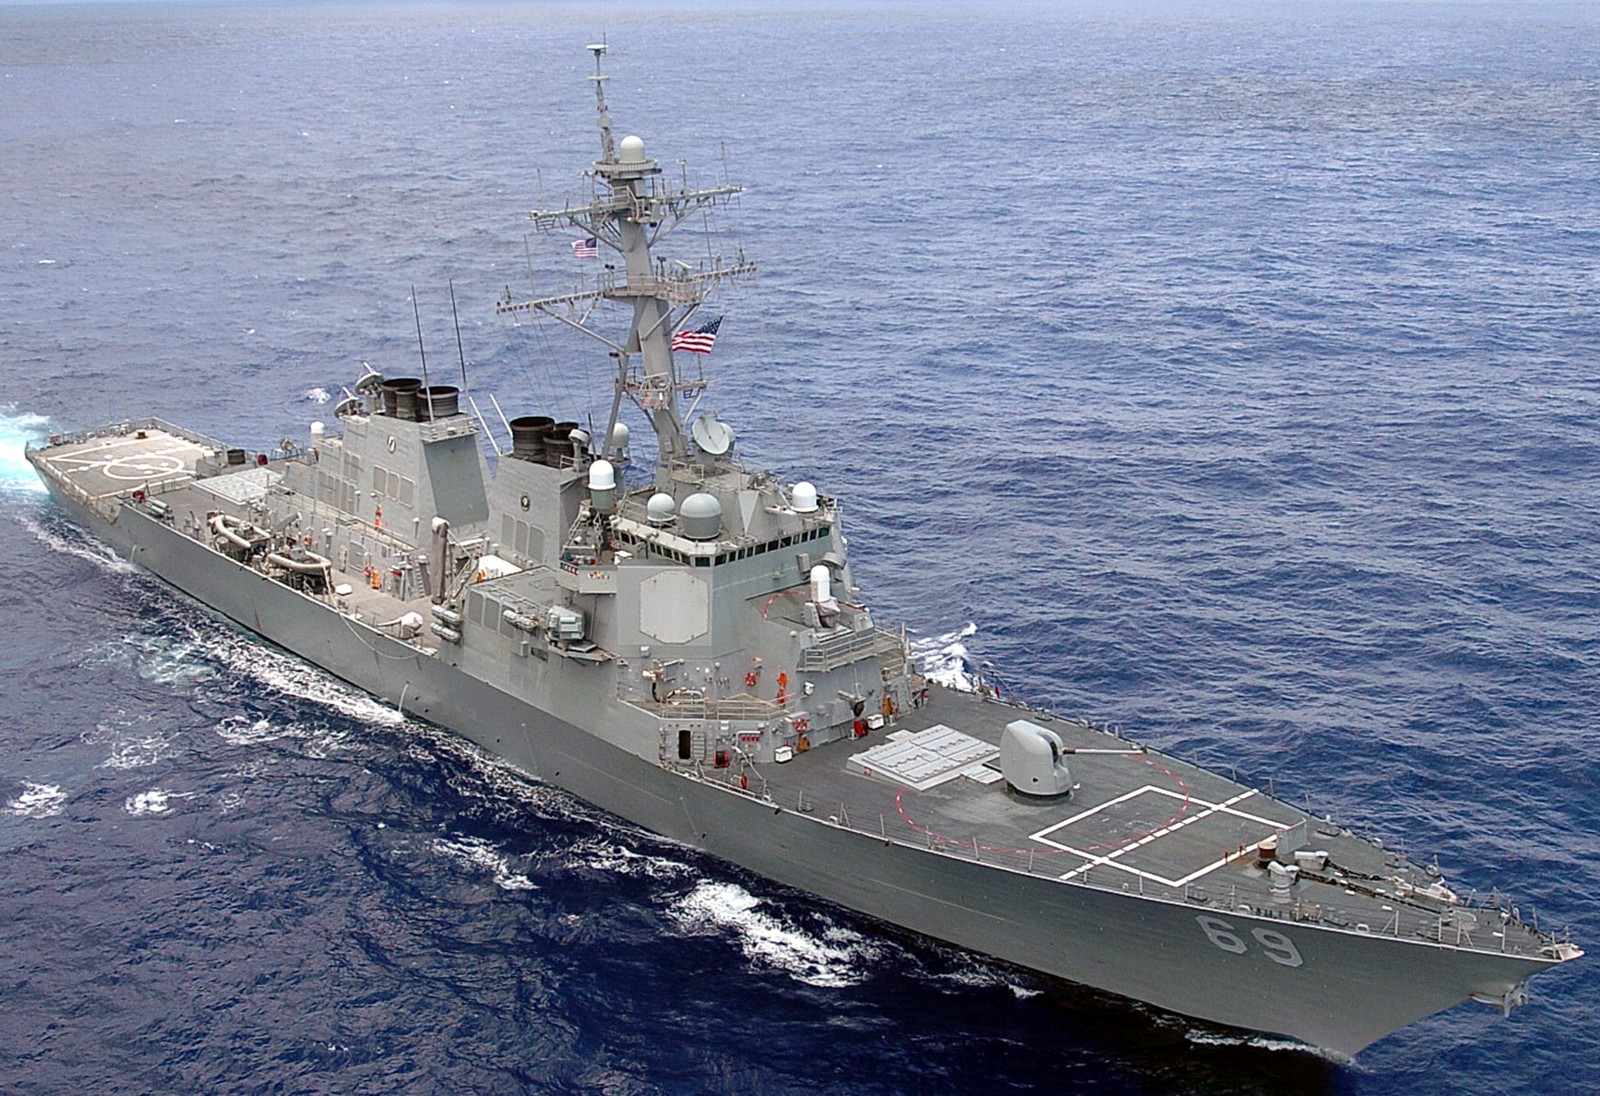 ddg-69 uss milius guided missile destroyer arleigh burke class aegis bmd 32